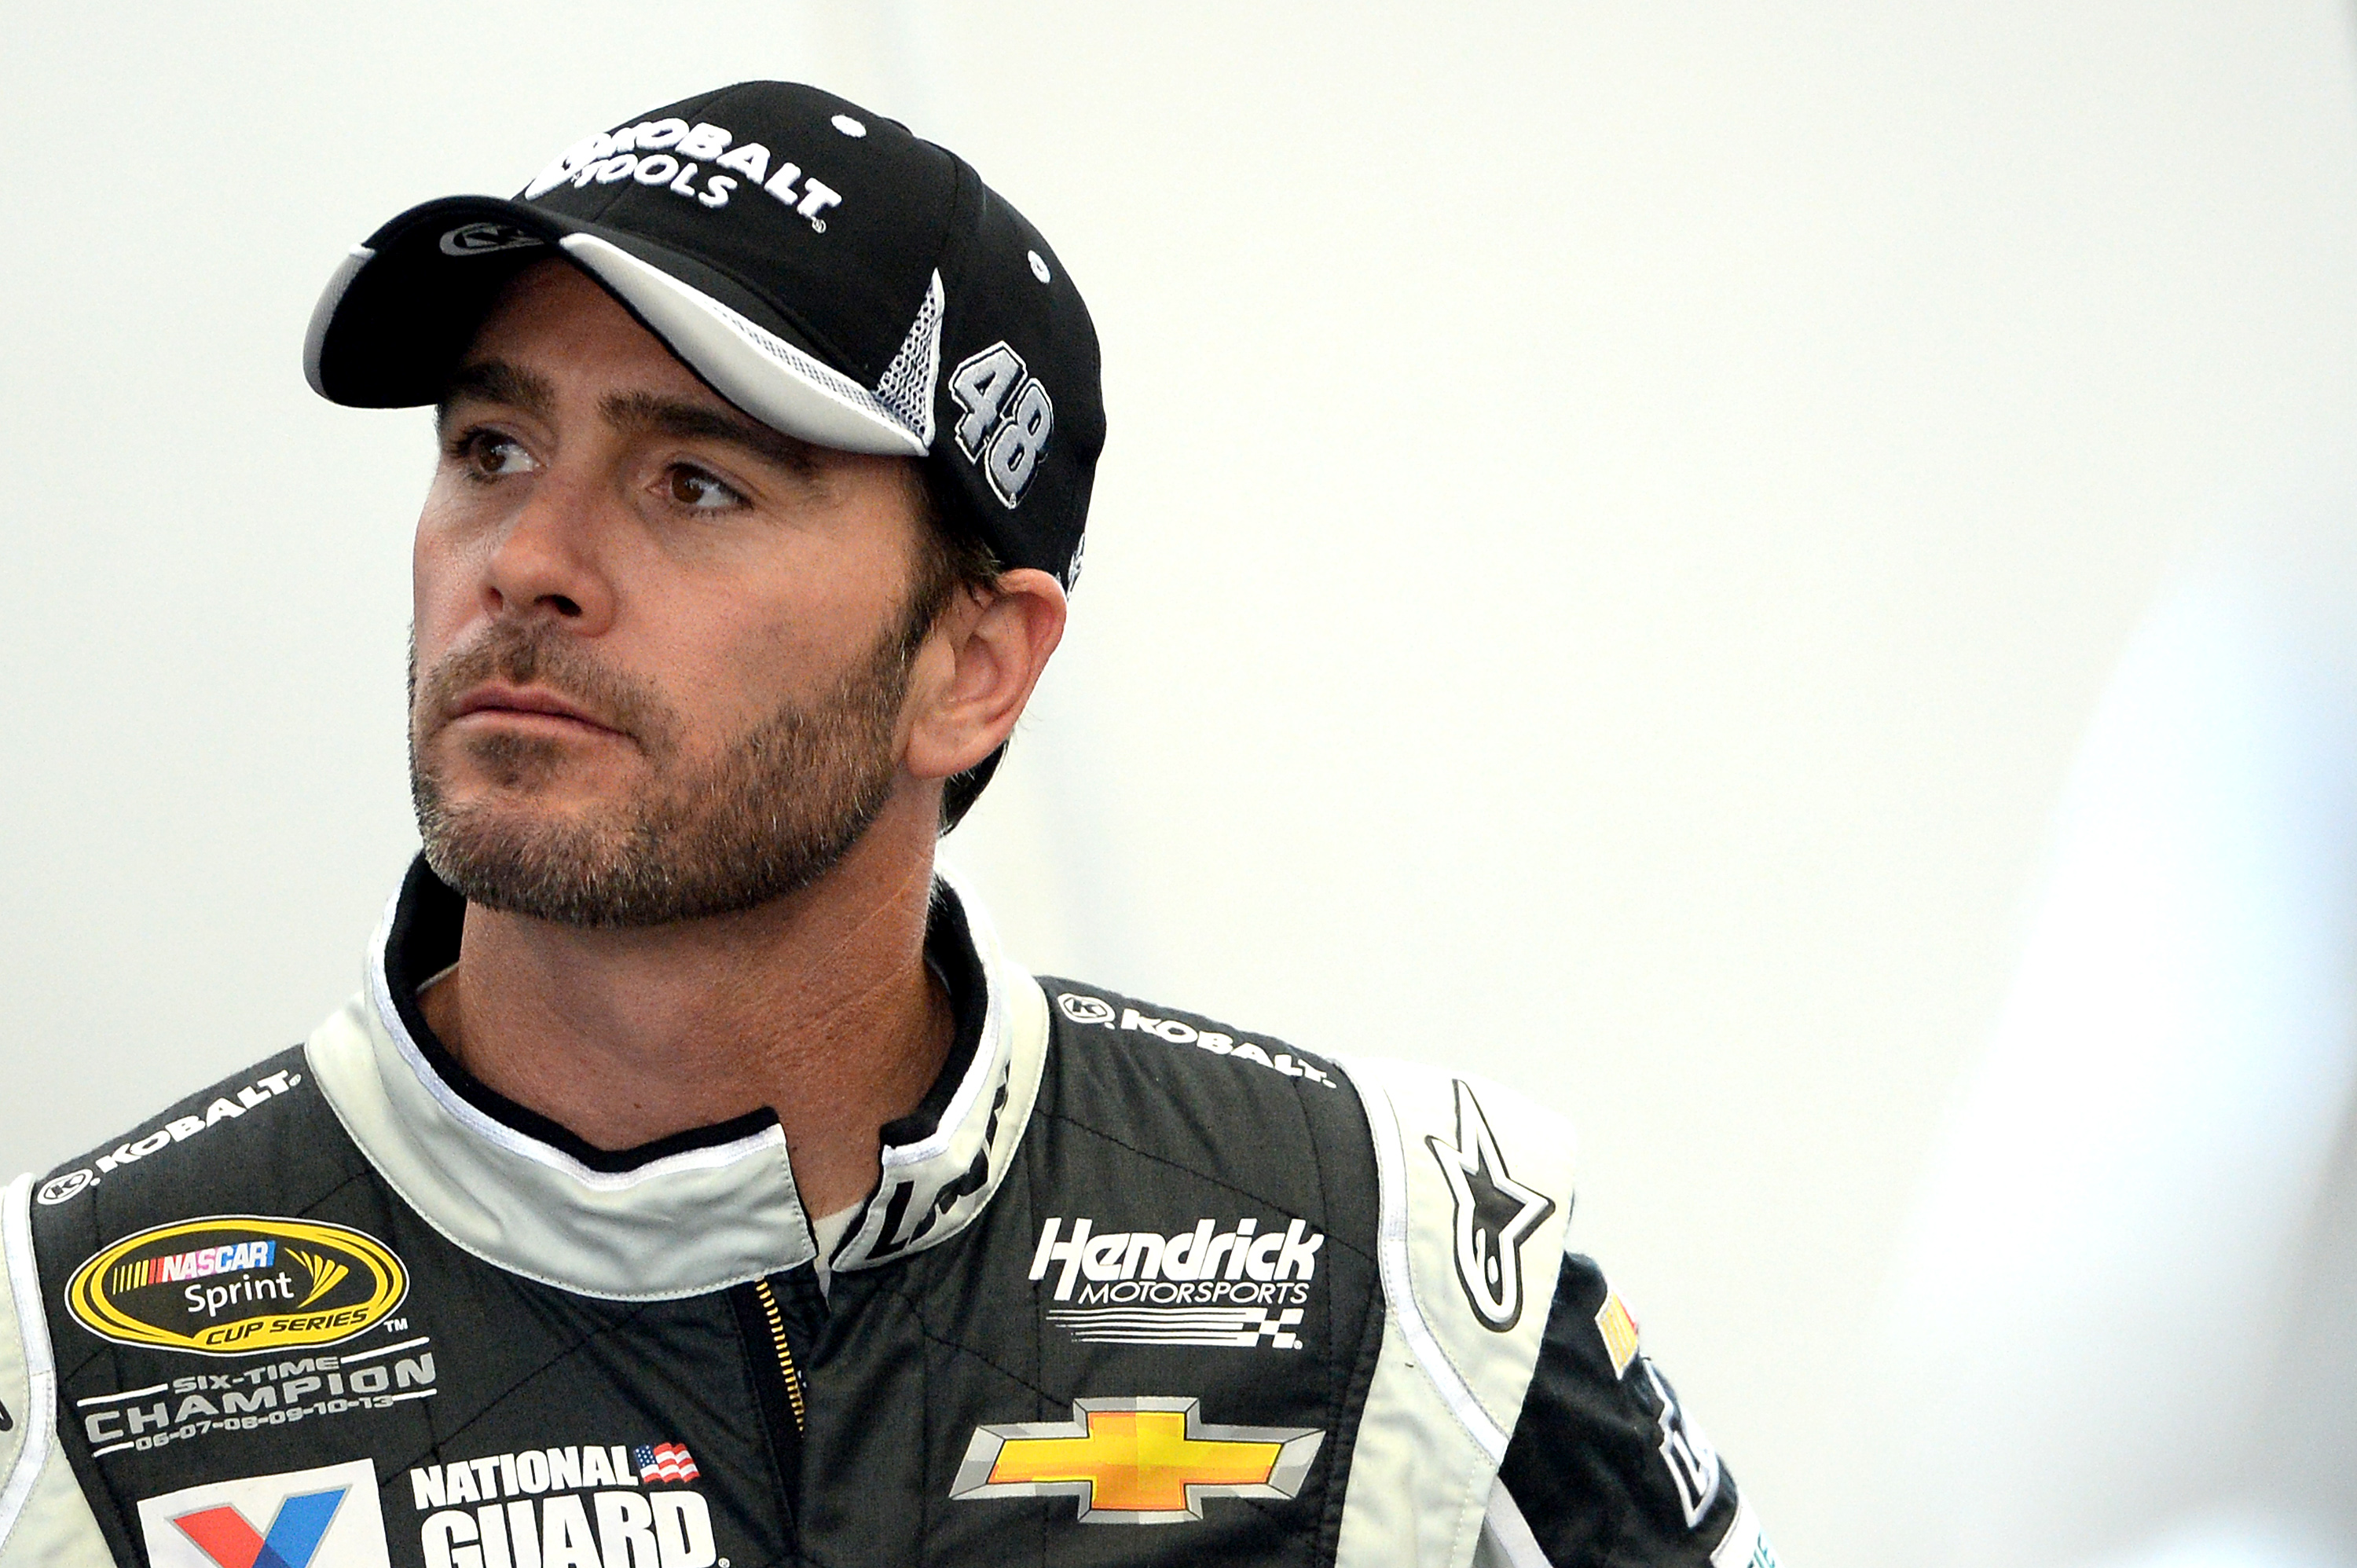 Jimmie Johnson recently revealed when he hit it big in the NASCAR world.